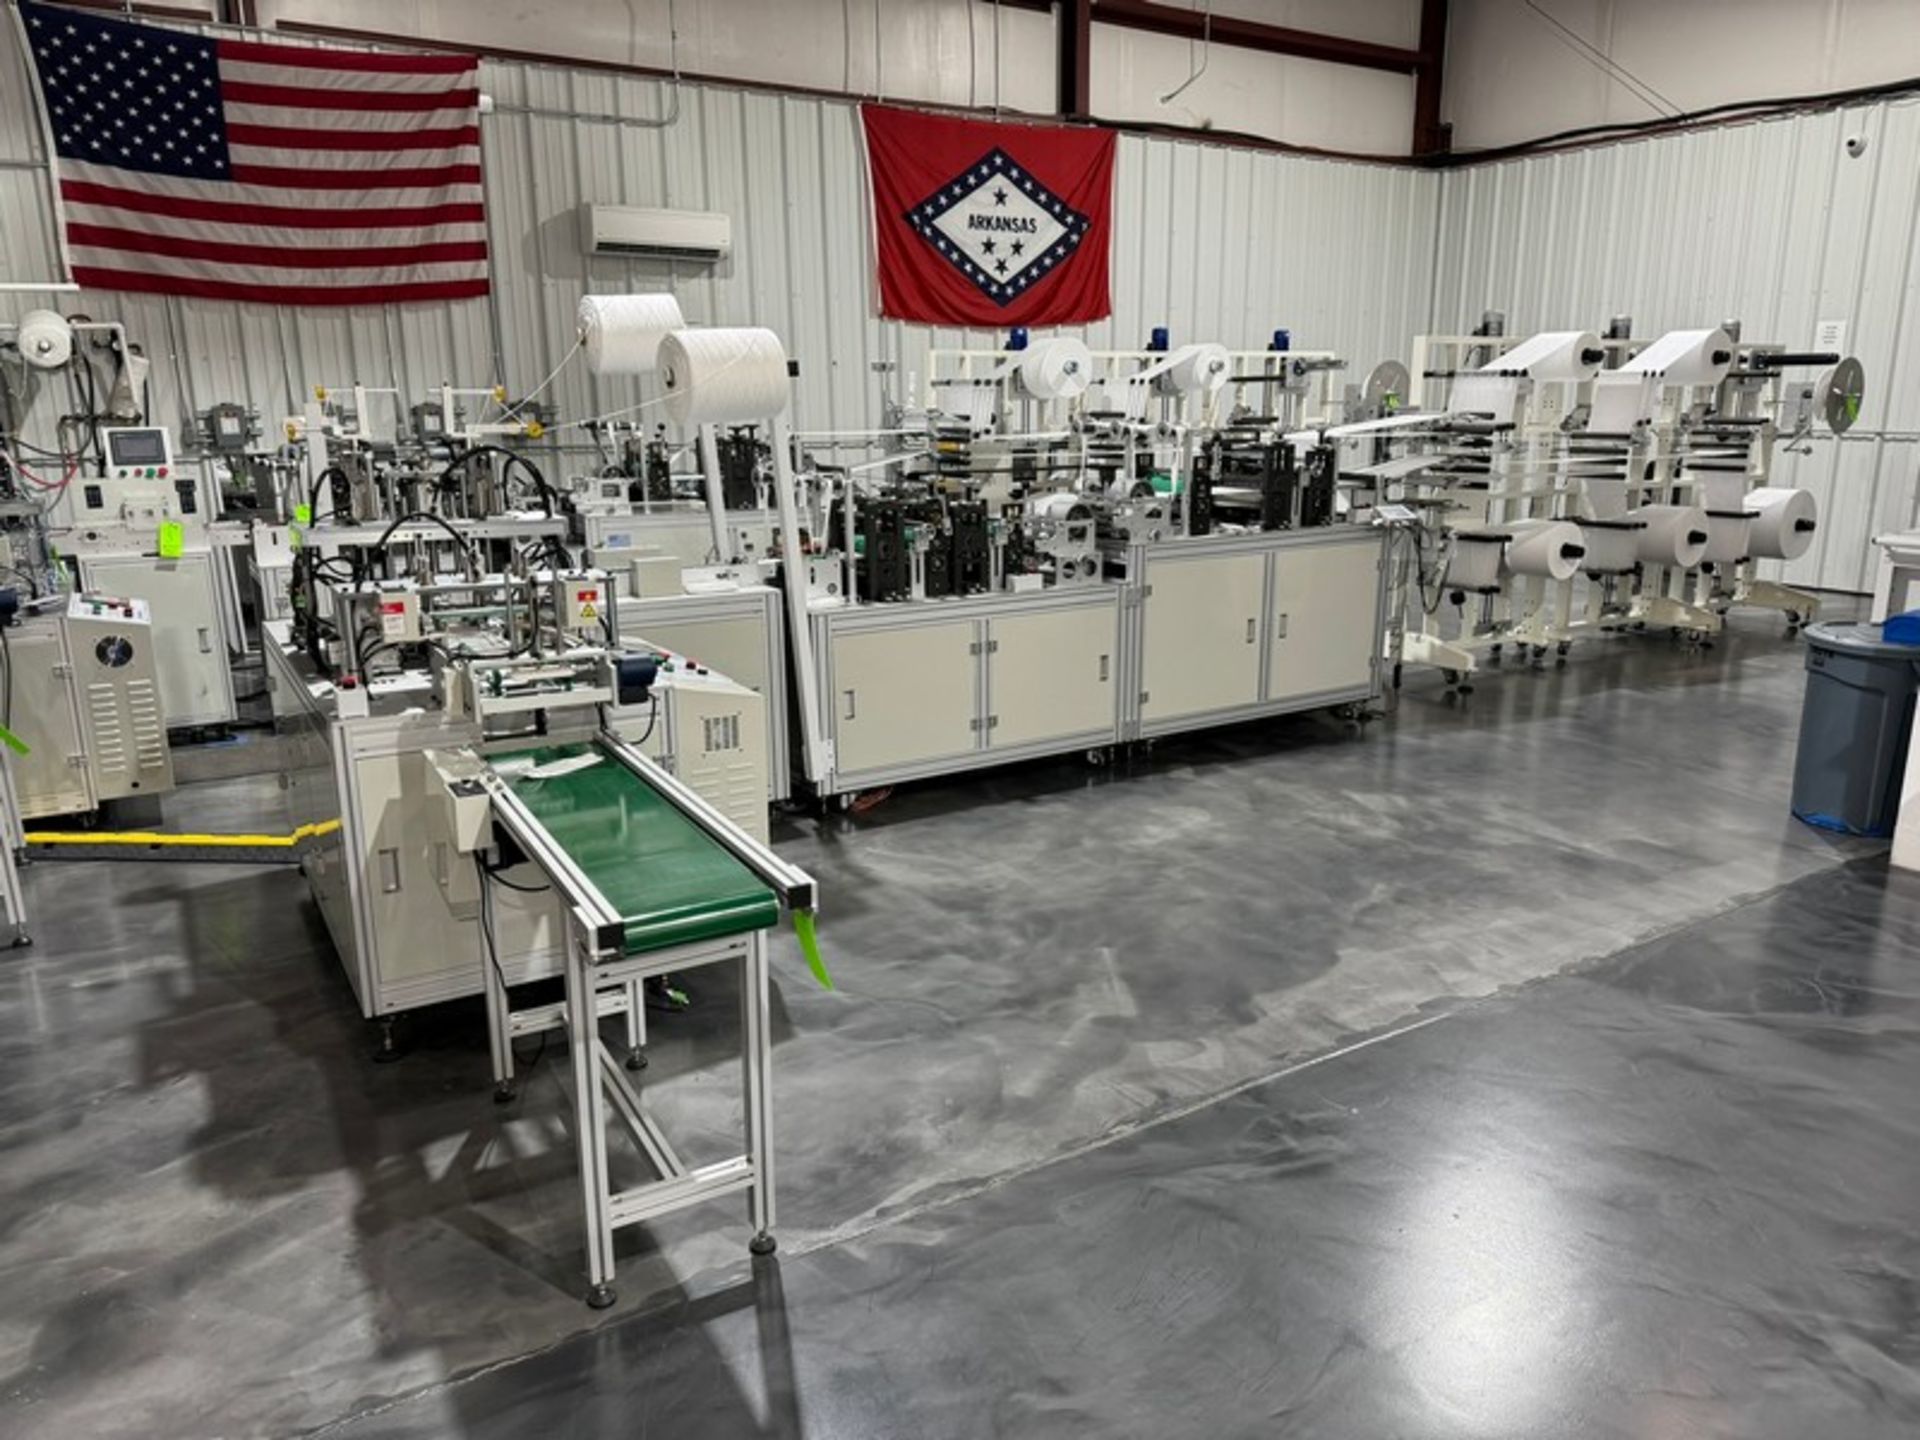 2022 KYD Automatic 6,000 Units Per Hour Mask Manufacturing Line, Includes Unwinding Station, Rolling - Bild 2 aus 30